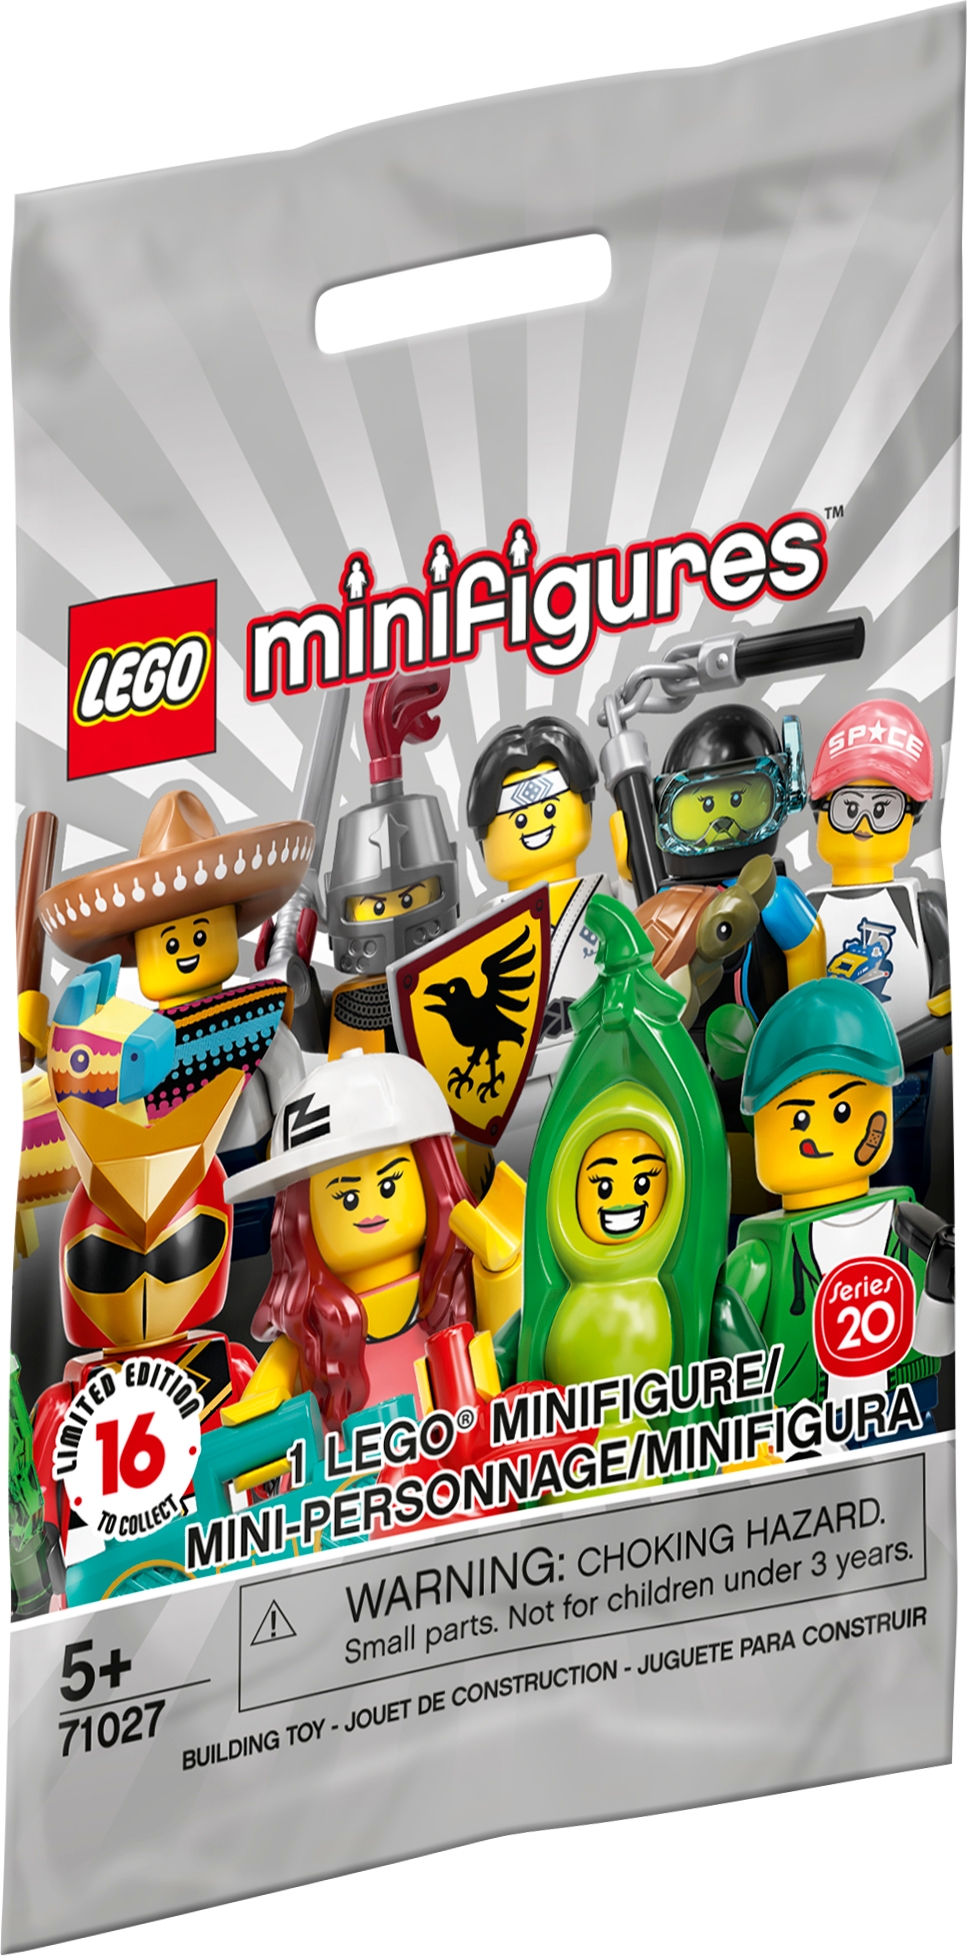 Display Case Frame for Lego Series 20 minifigures CMF 71027 no figures 25cm 